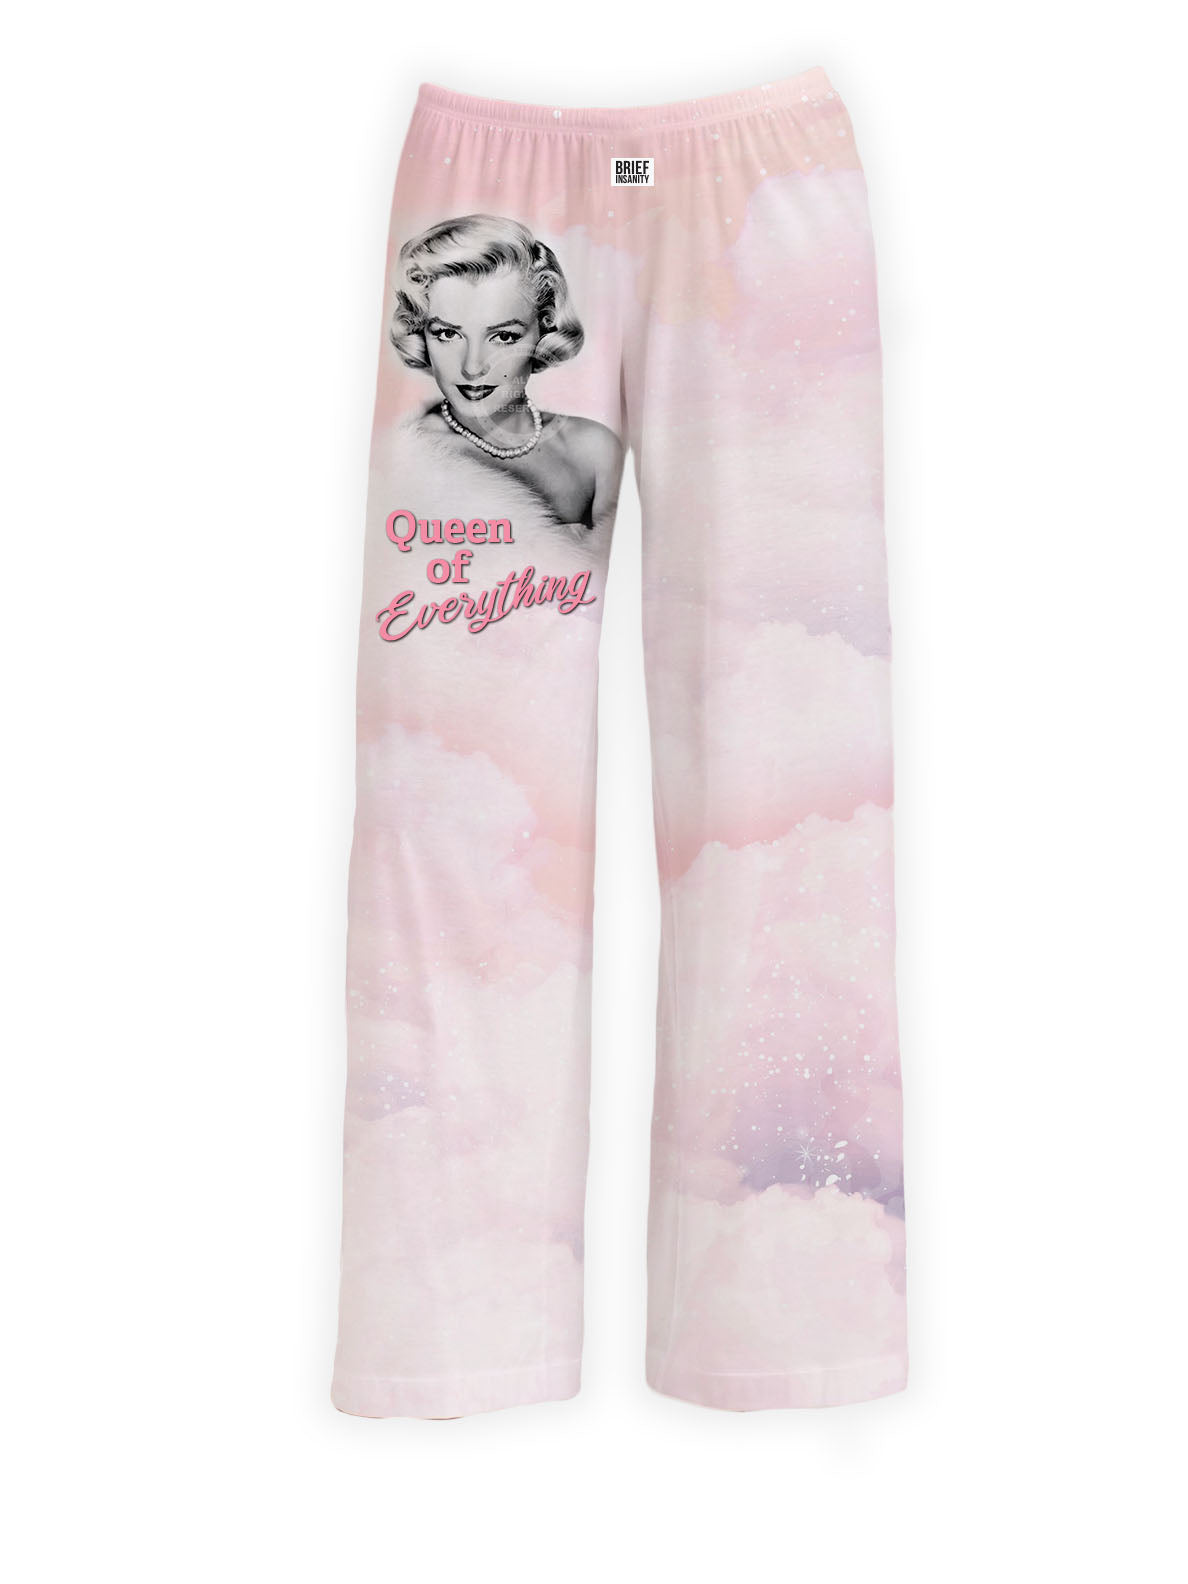 BRIEF INSANITY Marilyn Monroe "Queen of Everything" Pajama Pants